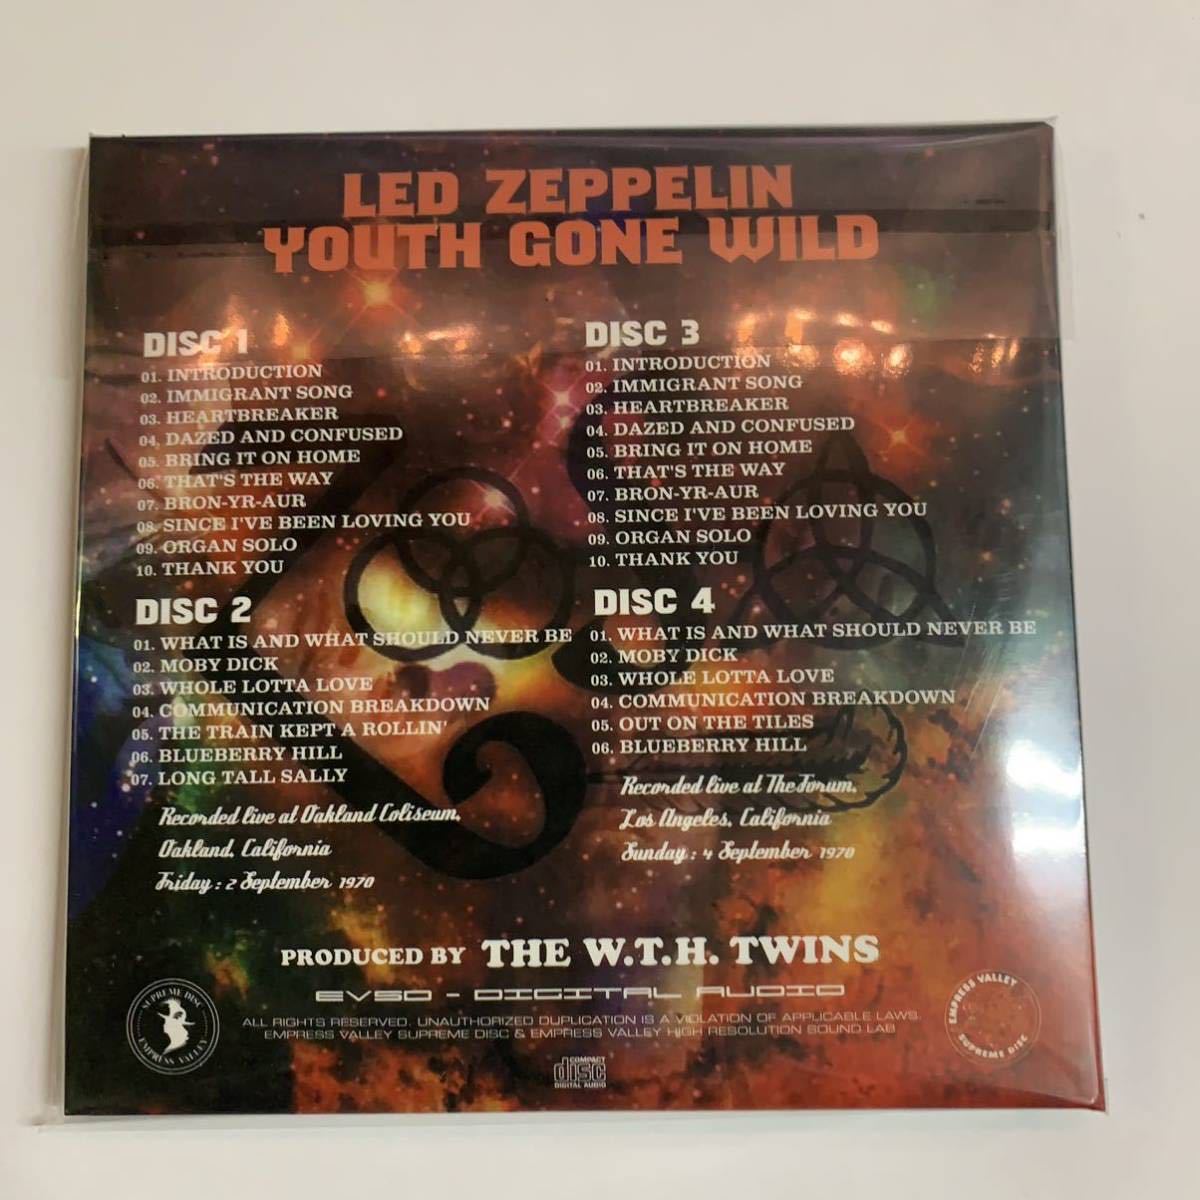 LED ZEPPELIN / YOUTH GONE WILD (4CD) EMPRESS VALLEY 男どあほうユース・ゴーン・ワイルド！_画像2